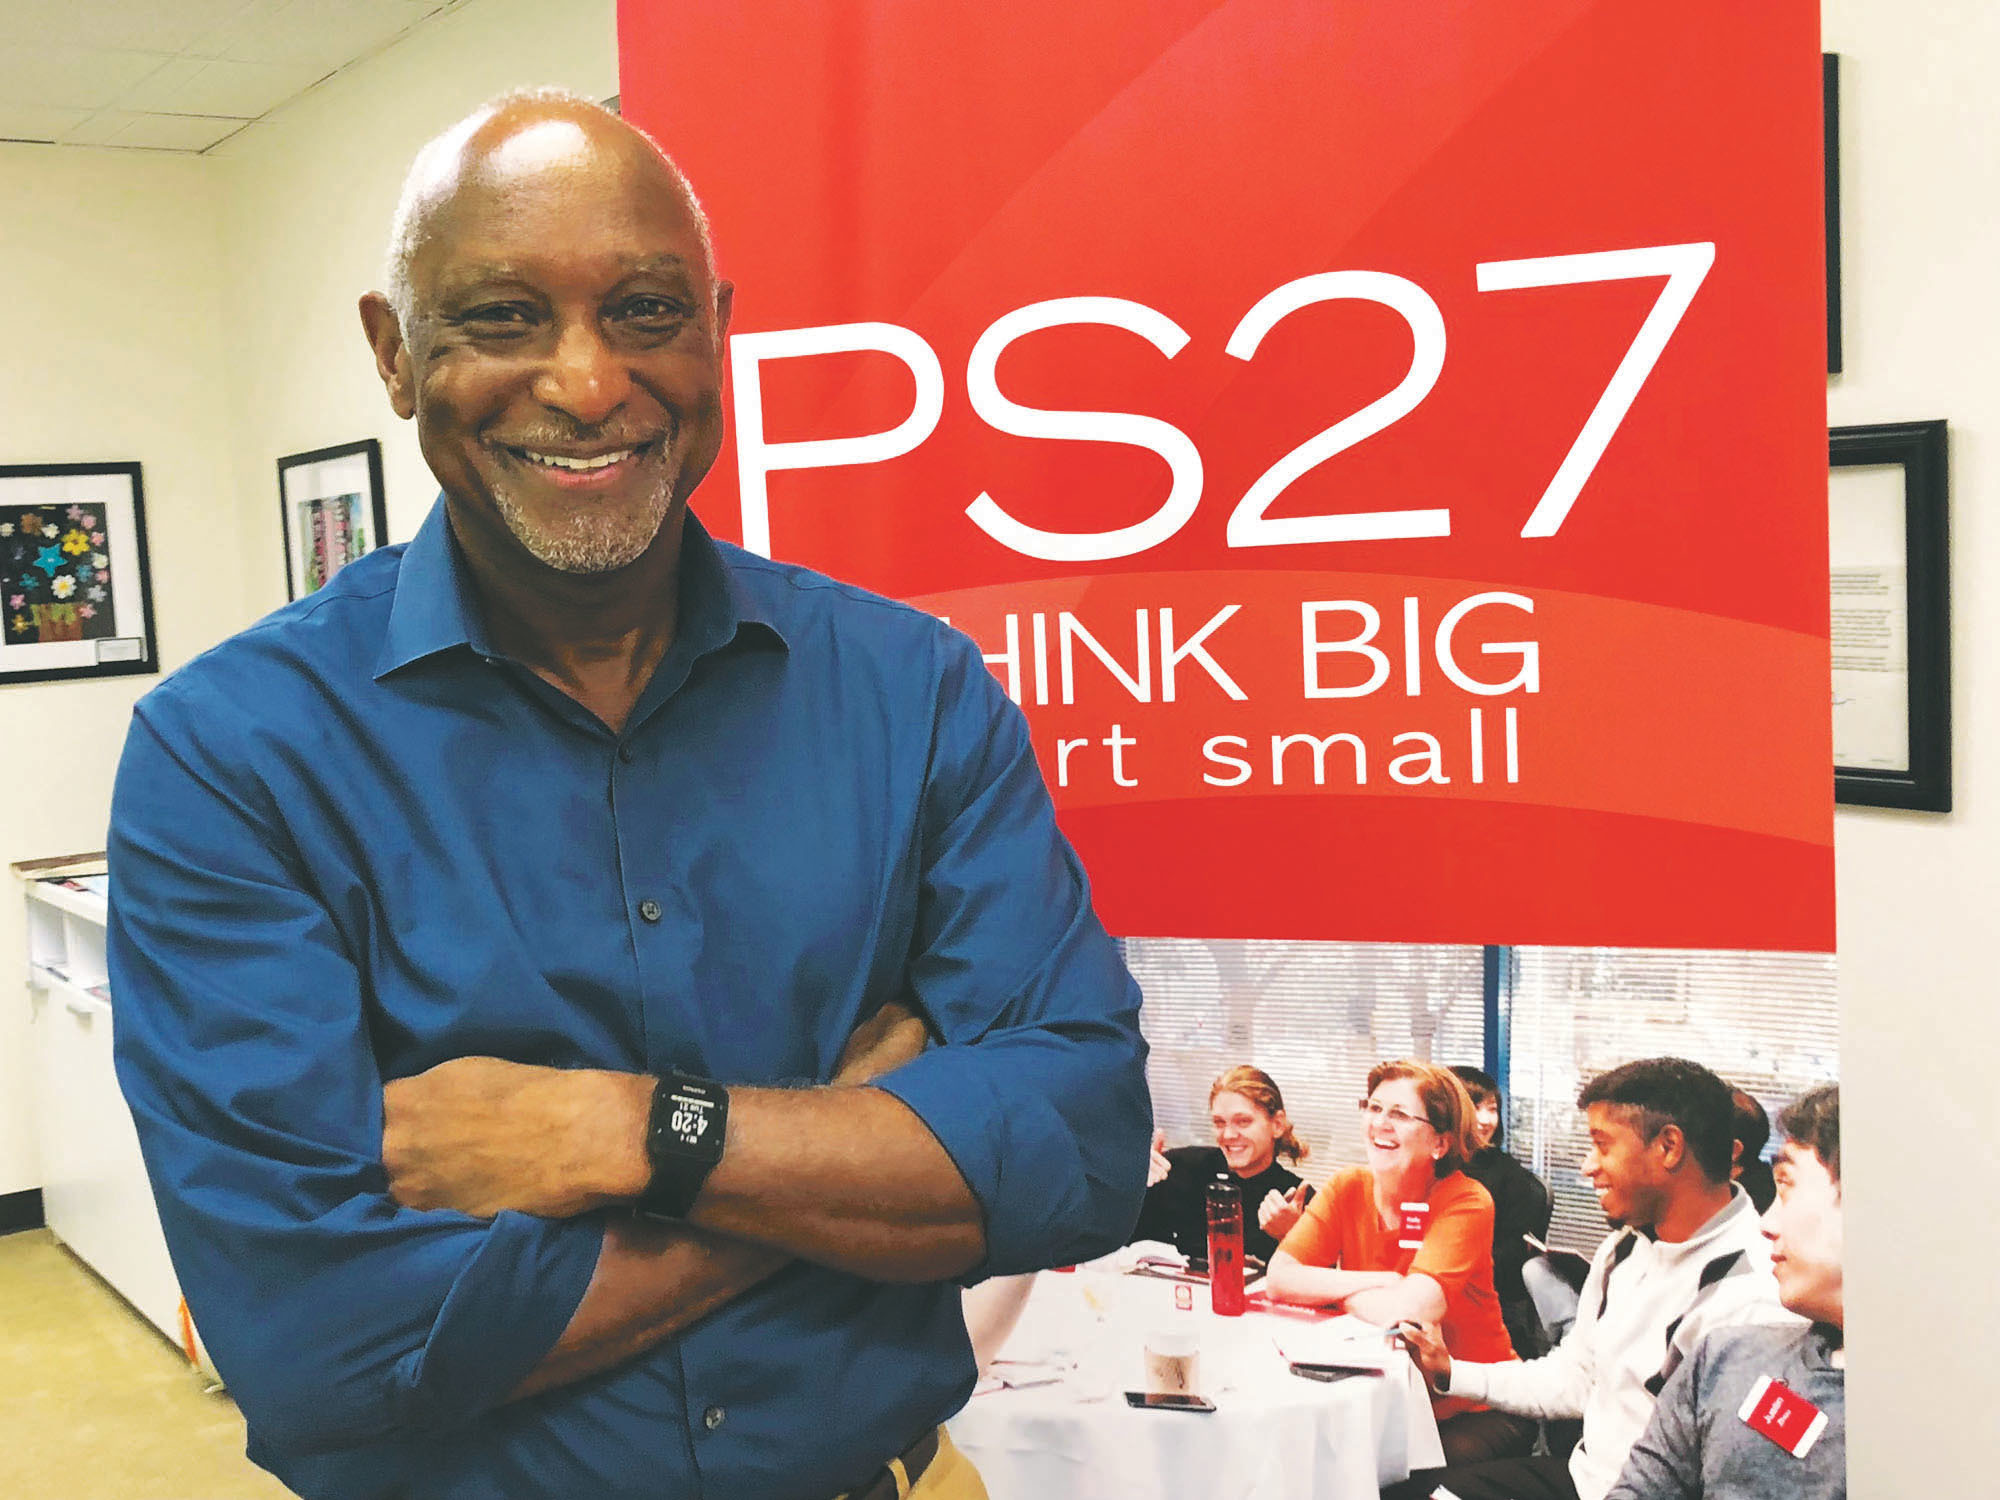 Jim Stallings, CEO of PS27 Ventures, said he sees more interest from investors to fund new companies,